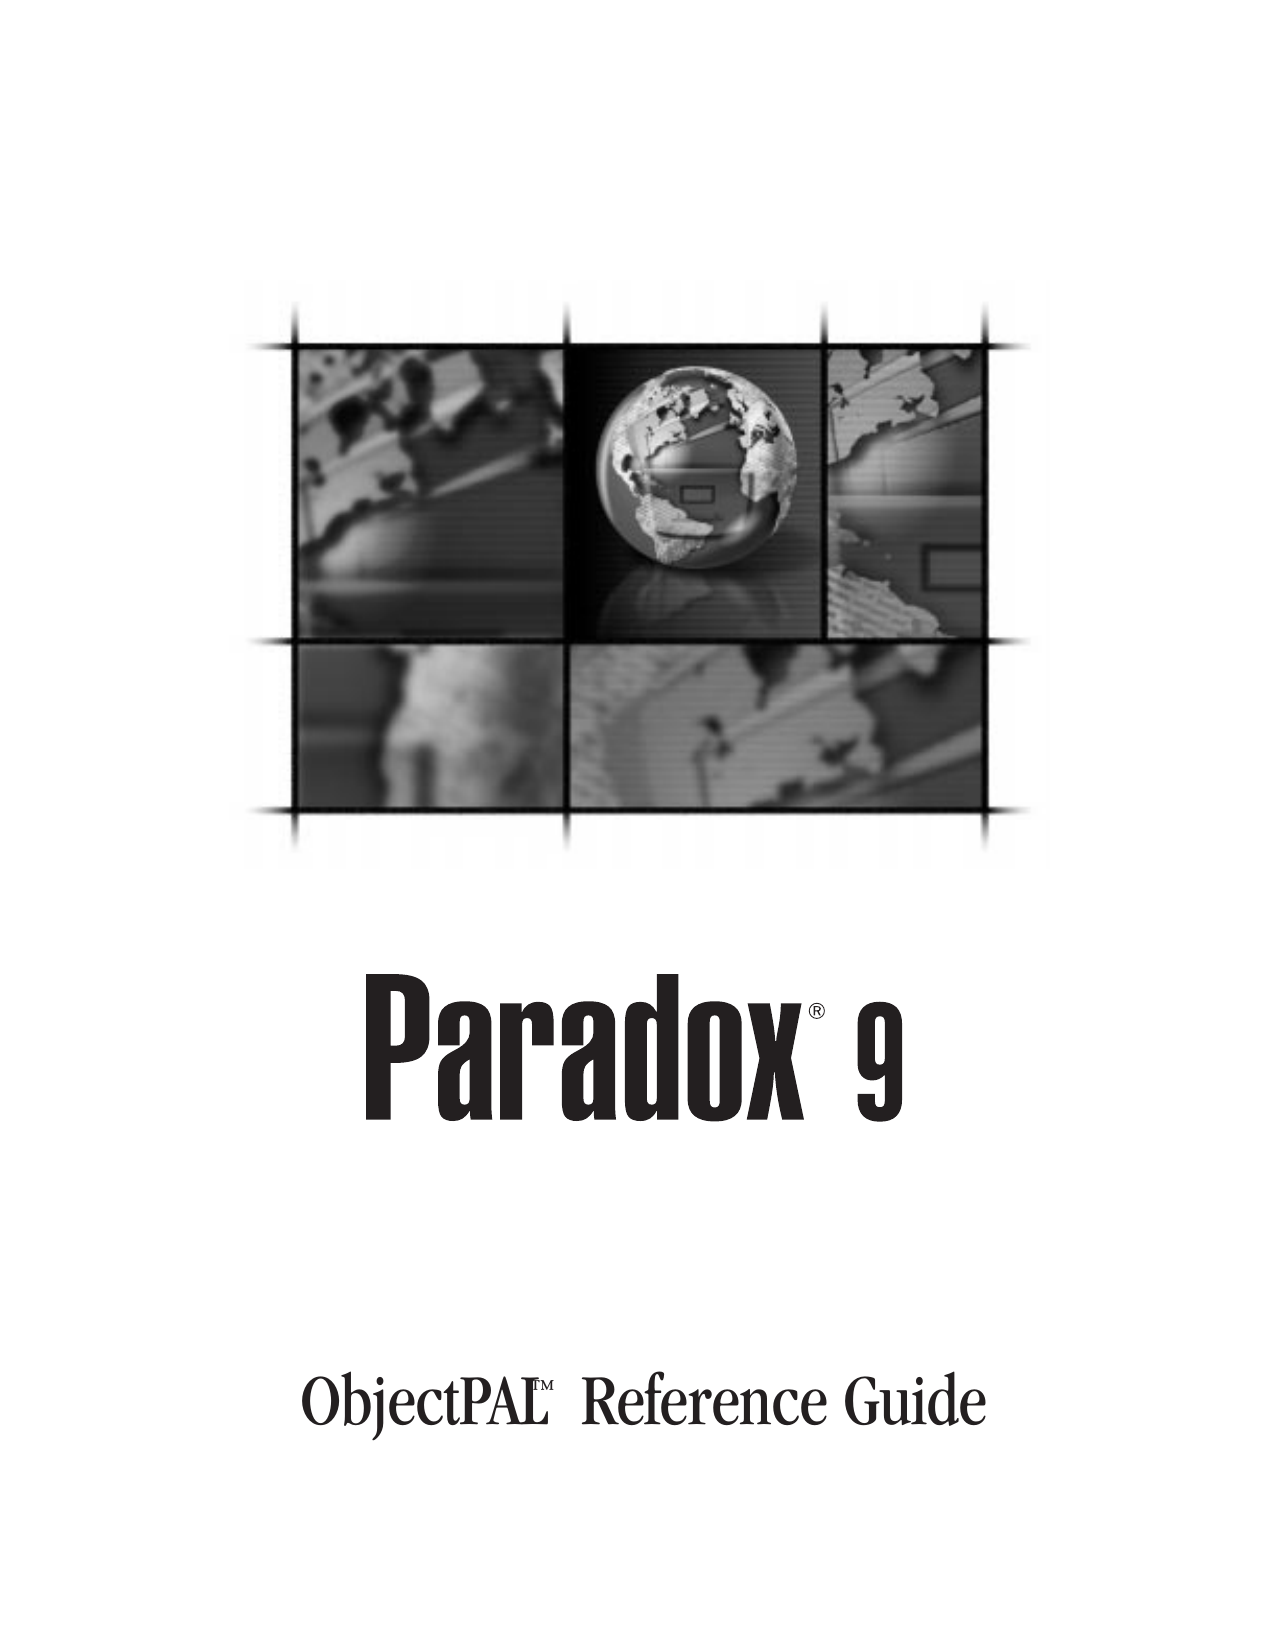 corel paradox dde session not opened. use open